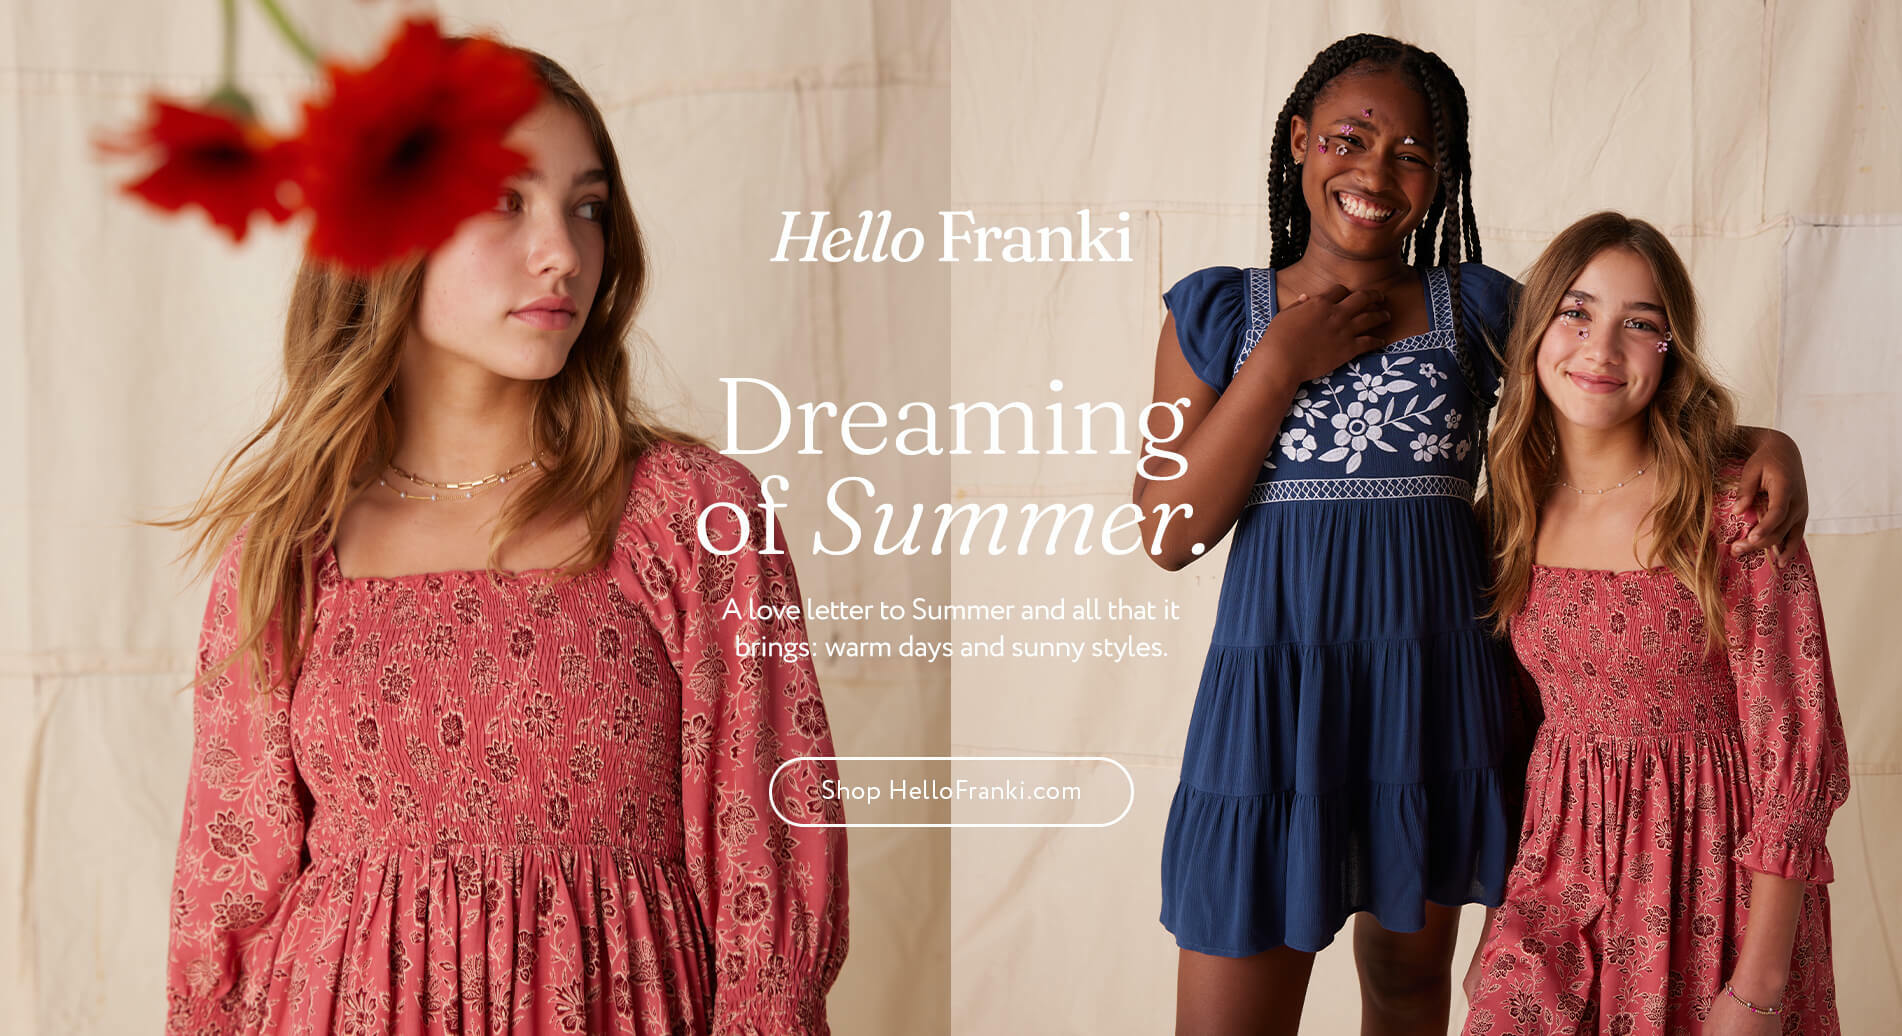 Hello Franki. Dreaming Of Summer. A Love Letter To Summer And All That It Brings; Warm Days And Sunny Styles. Shop Hellofranki.com.